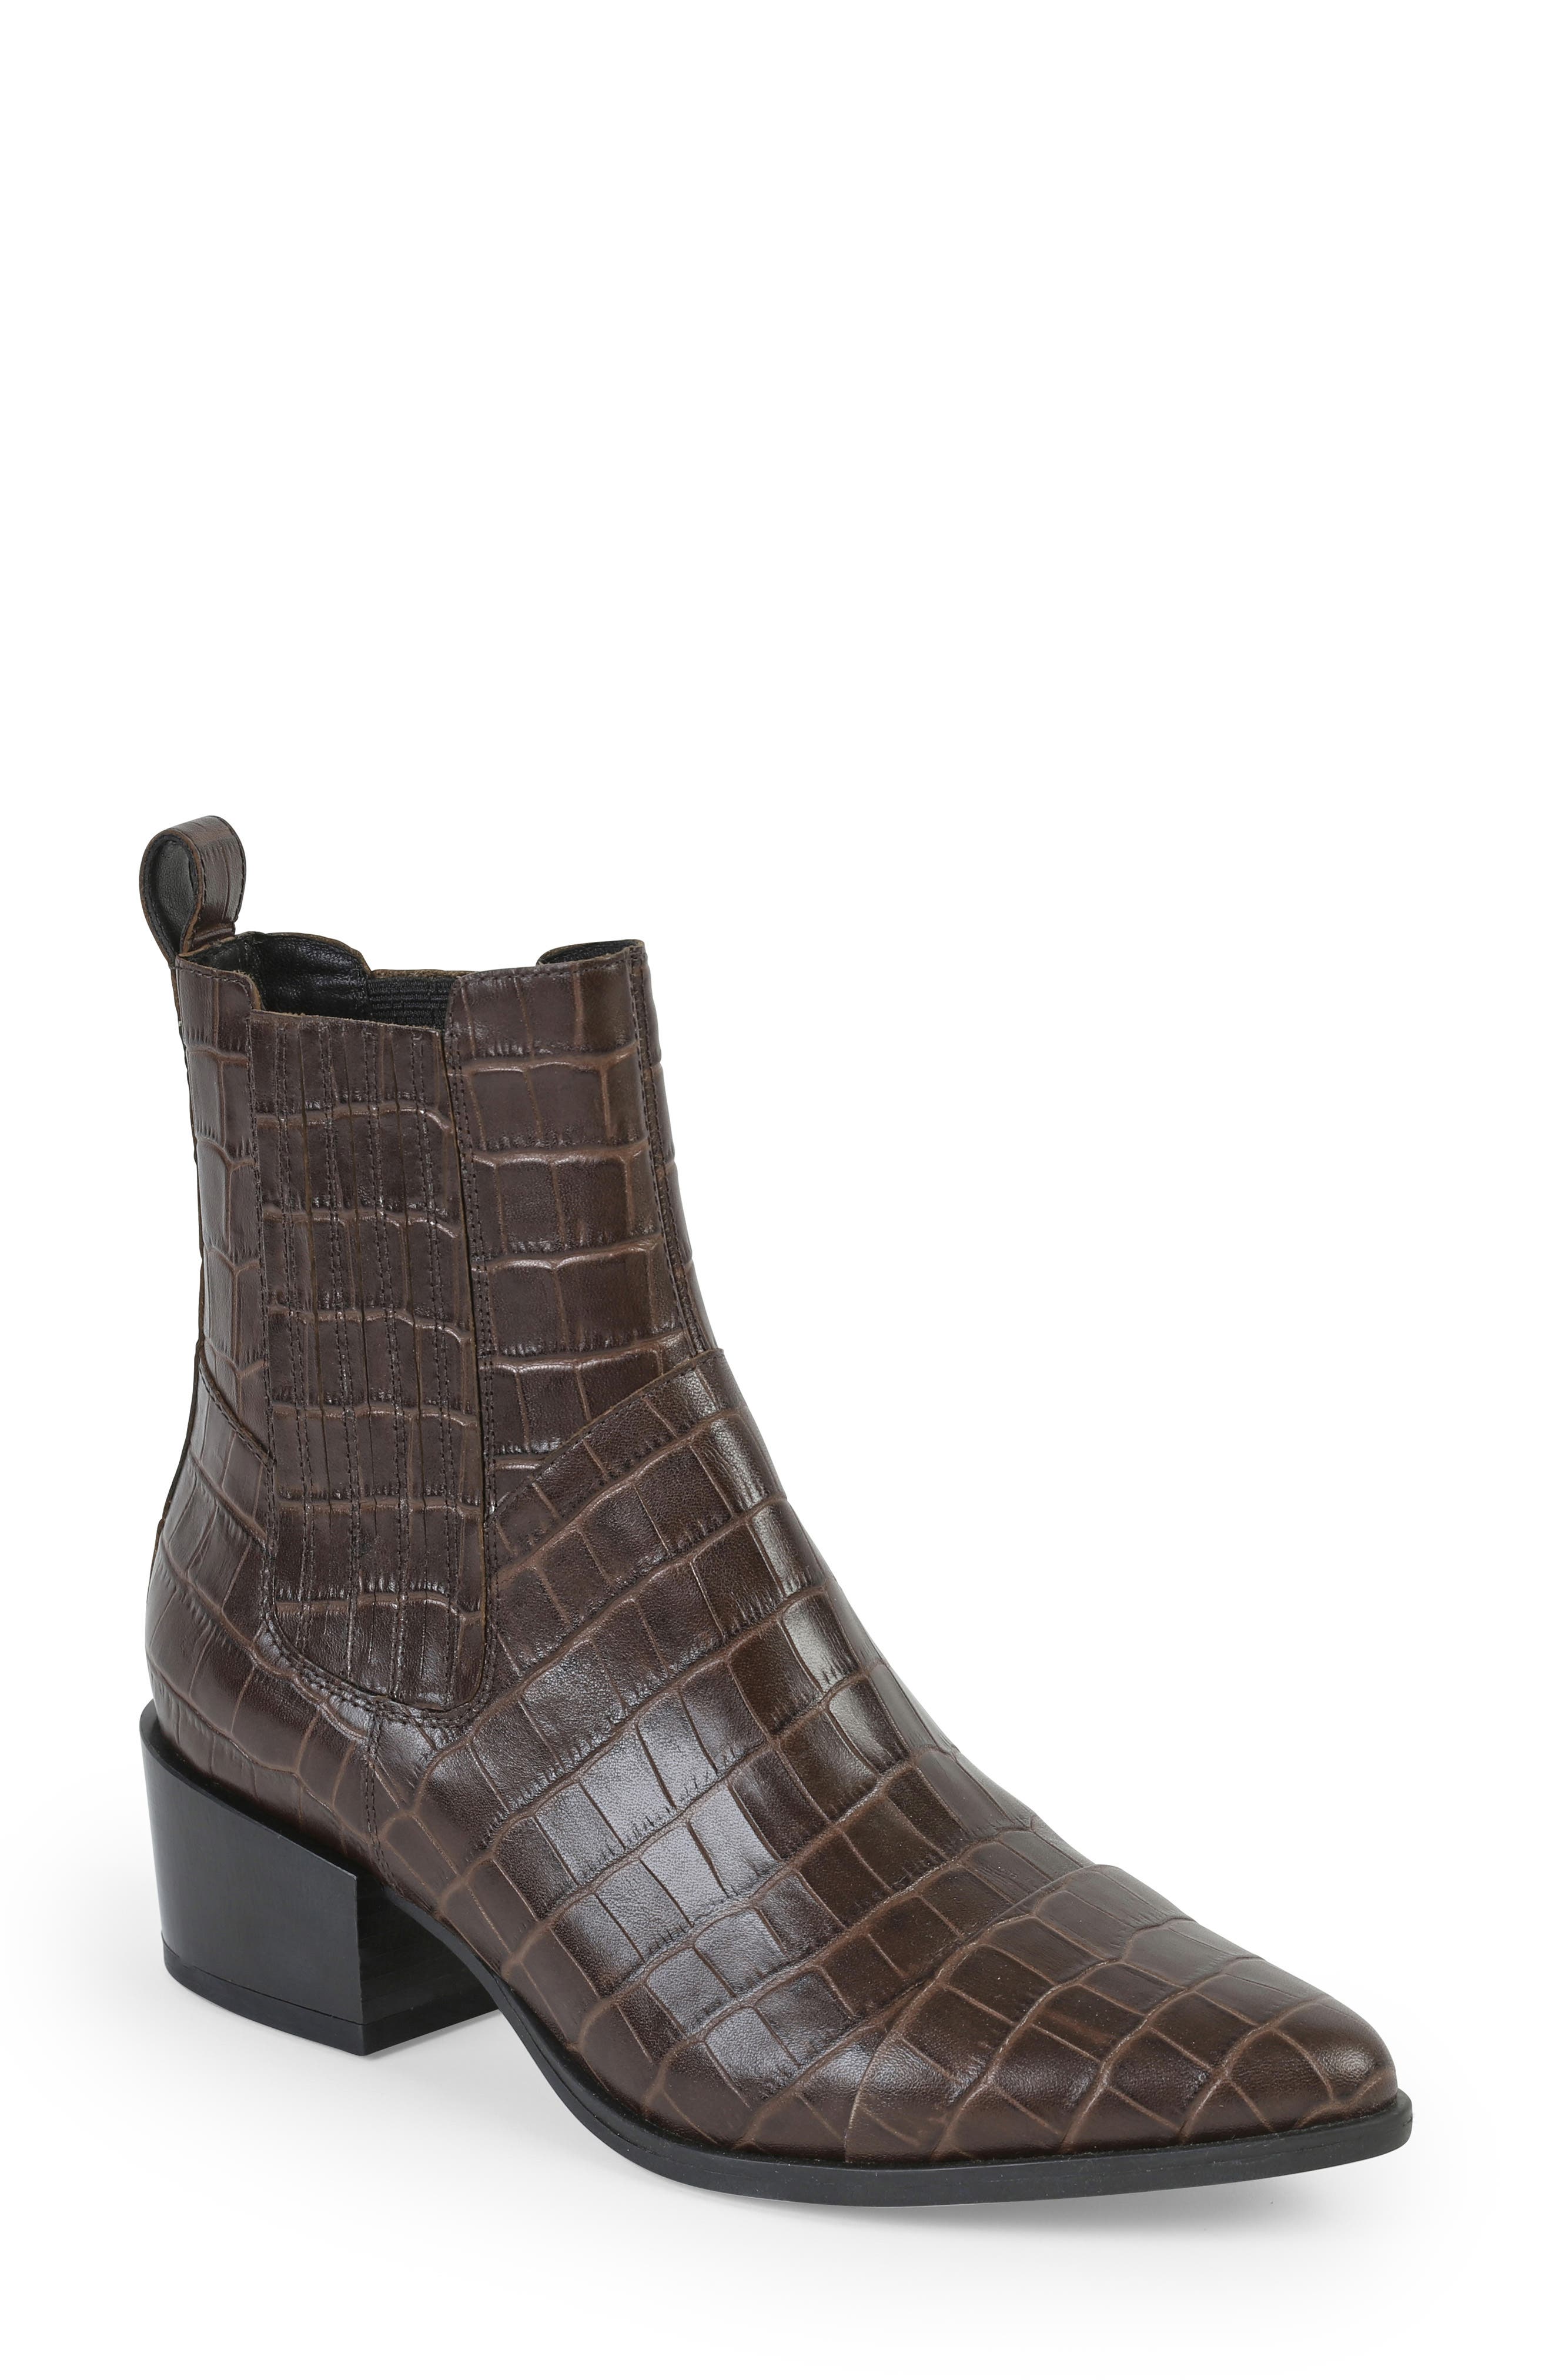 Vagabond Shoemakers Cap Toe Bootie In Brown Leather |